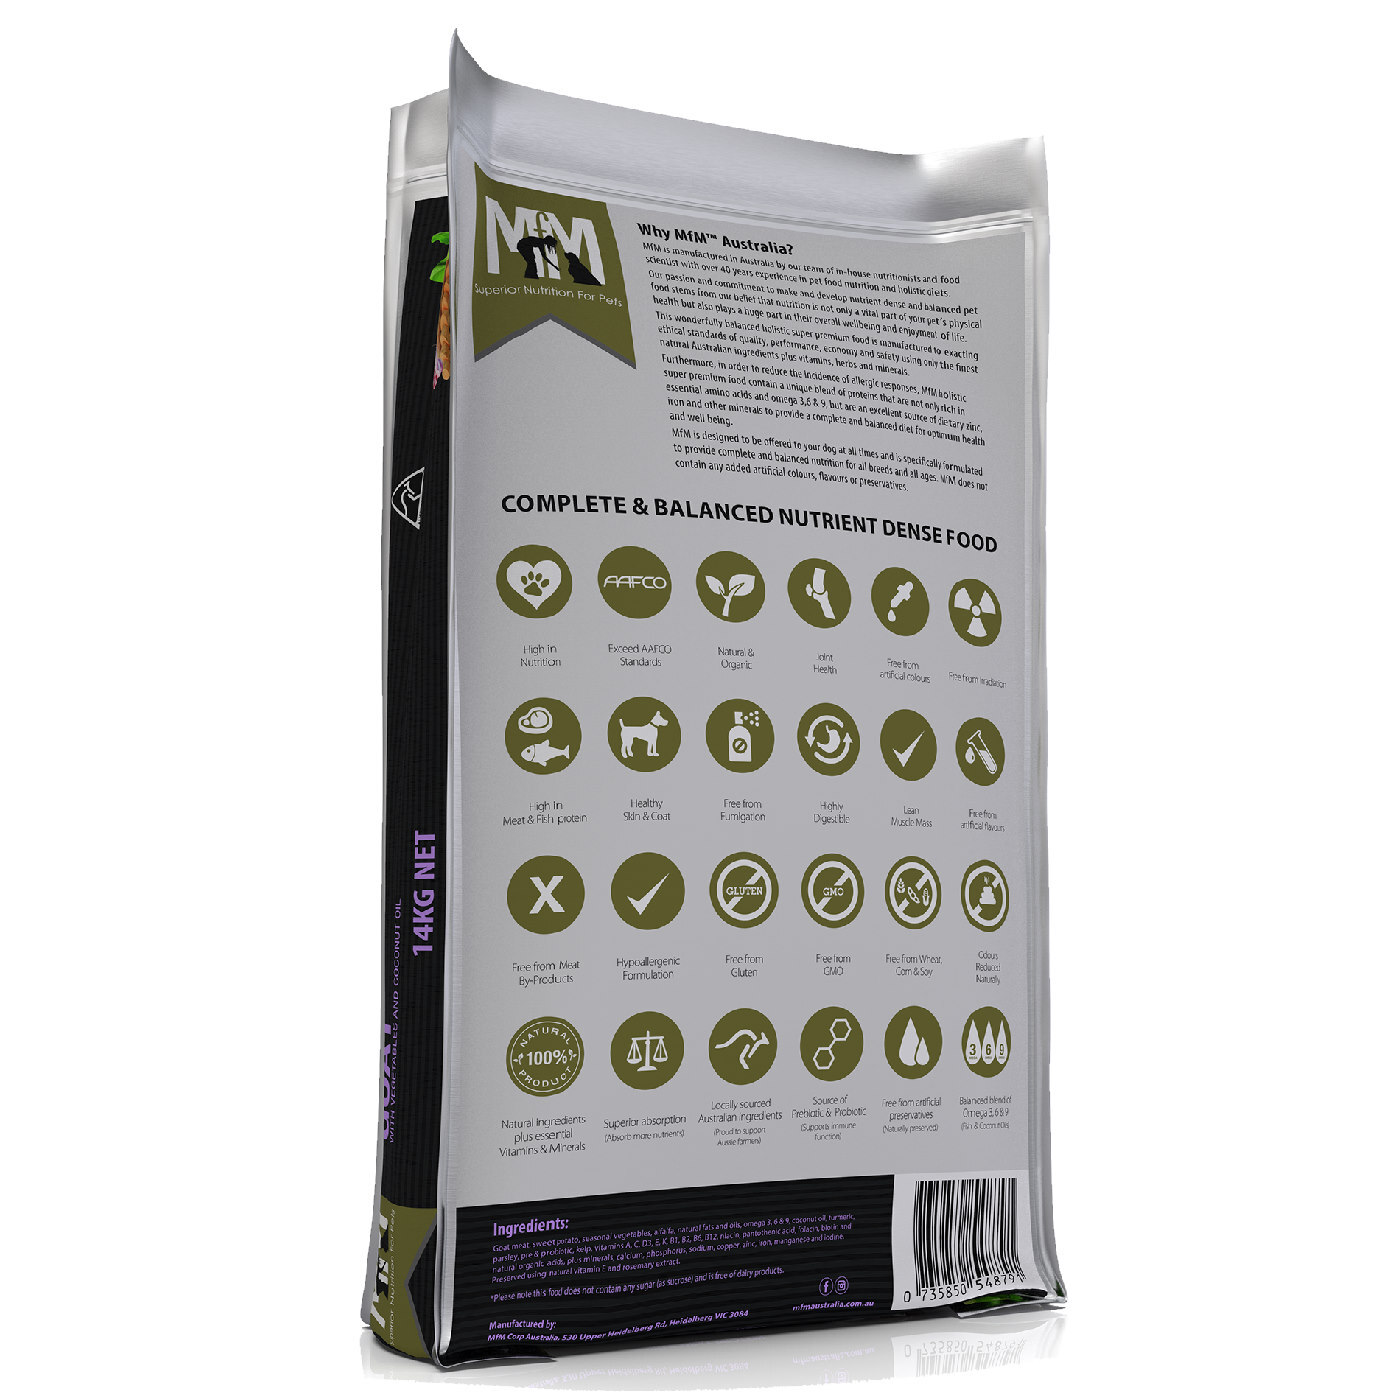 Meals for Mutts Single Ingredient Grain Free Dry Dog Food - Goat 14kg  image 0